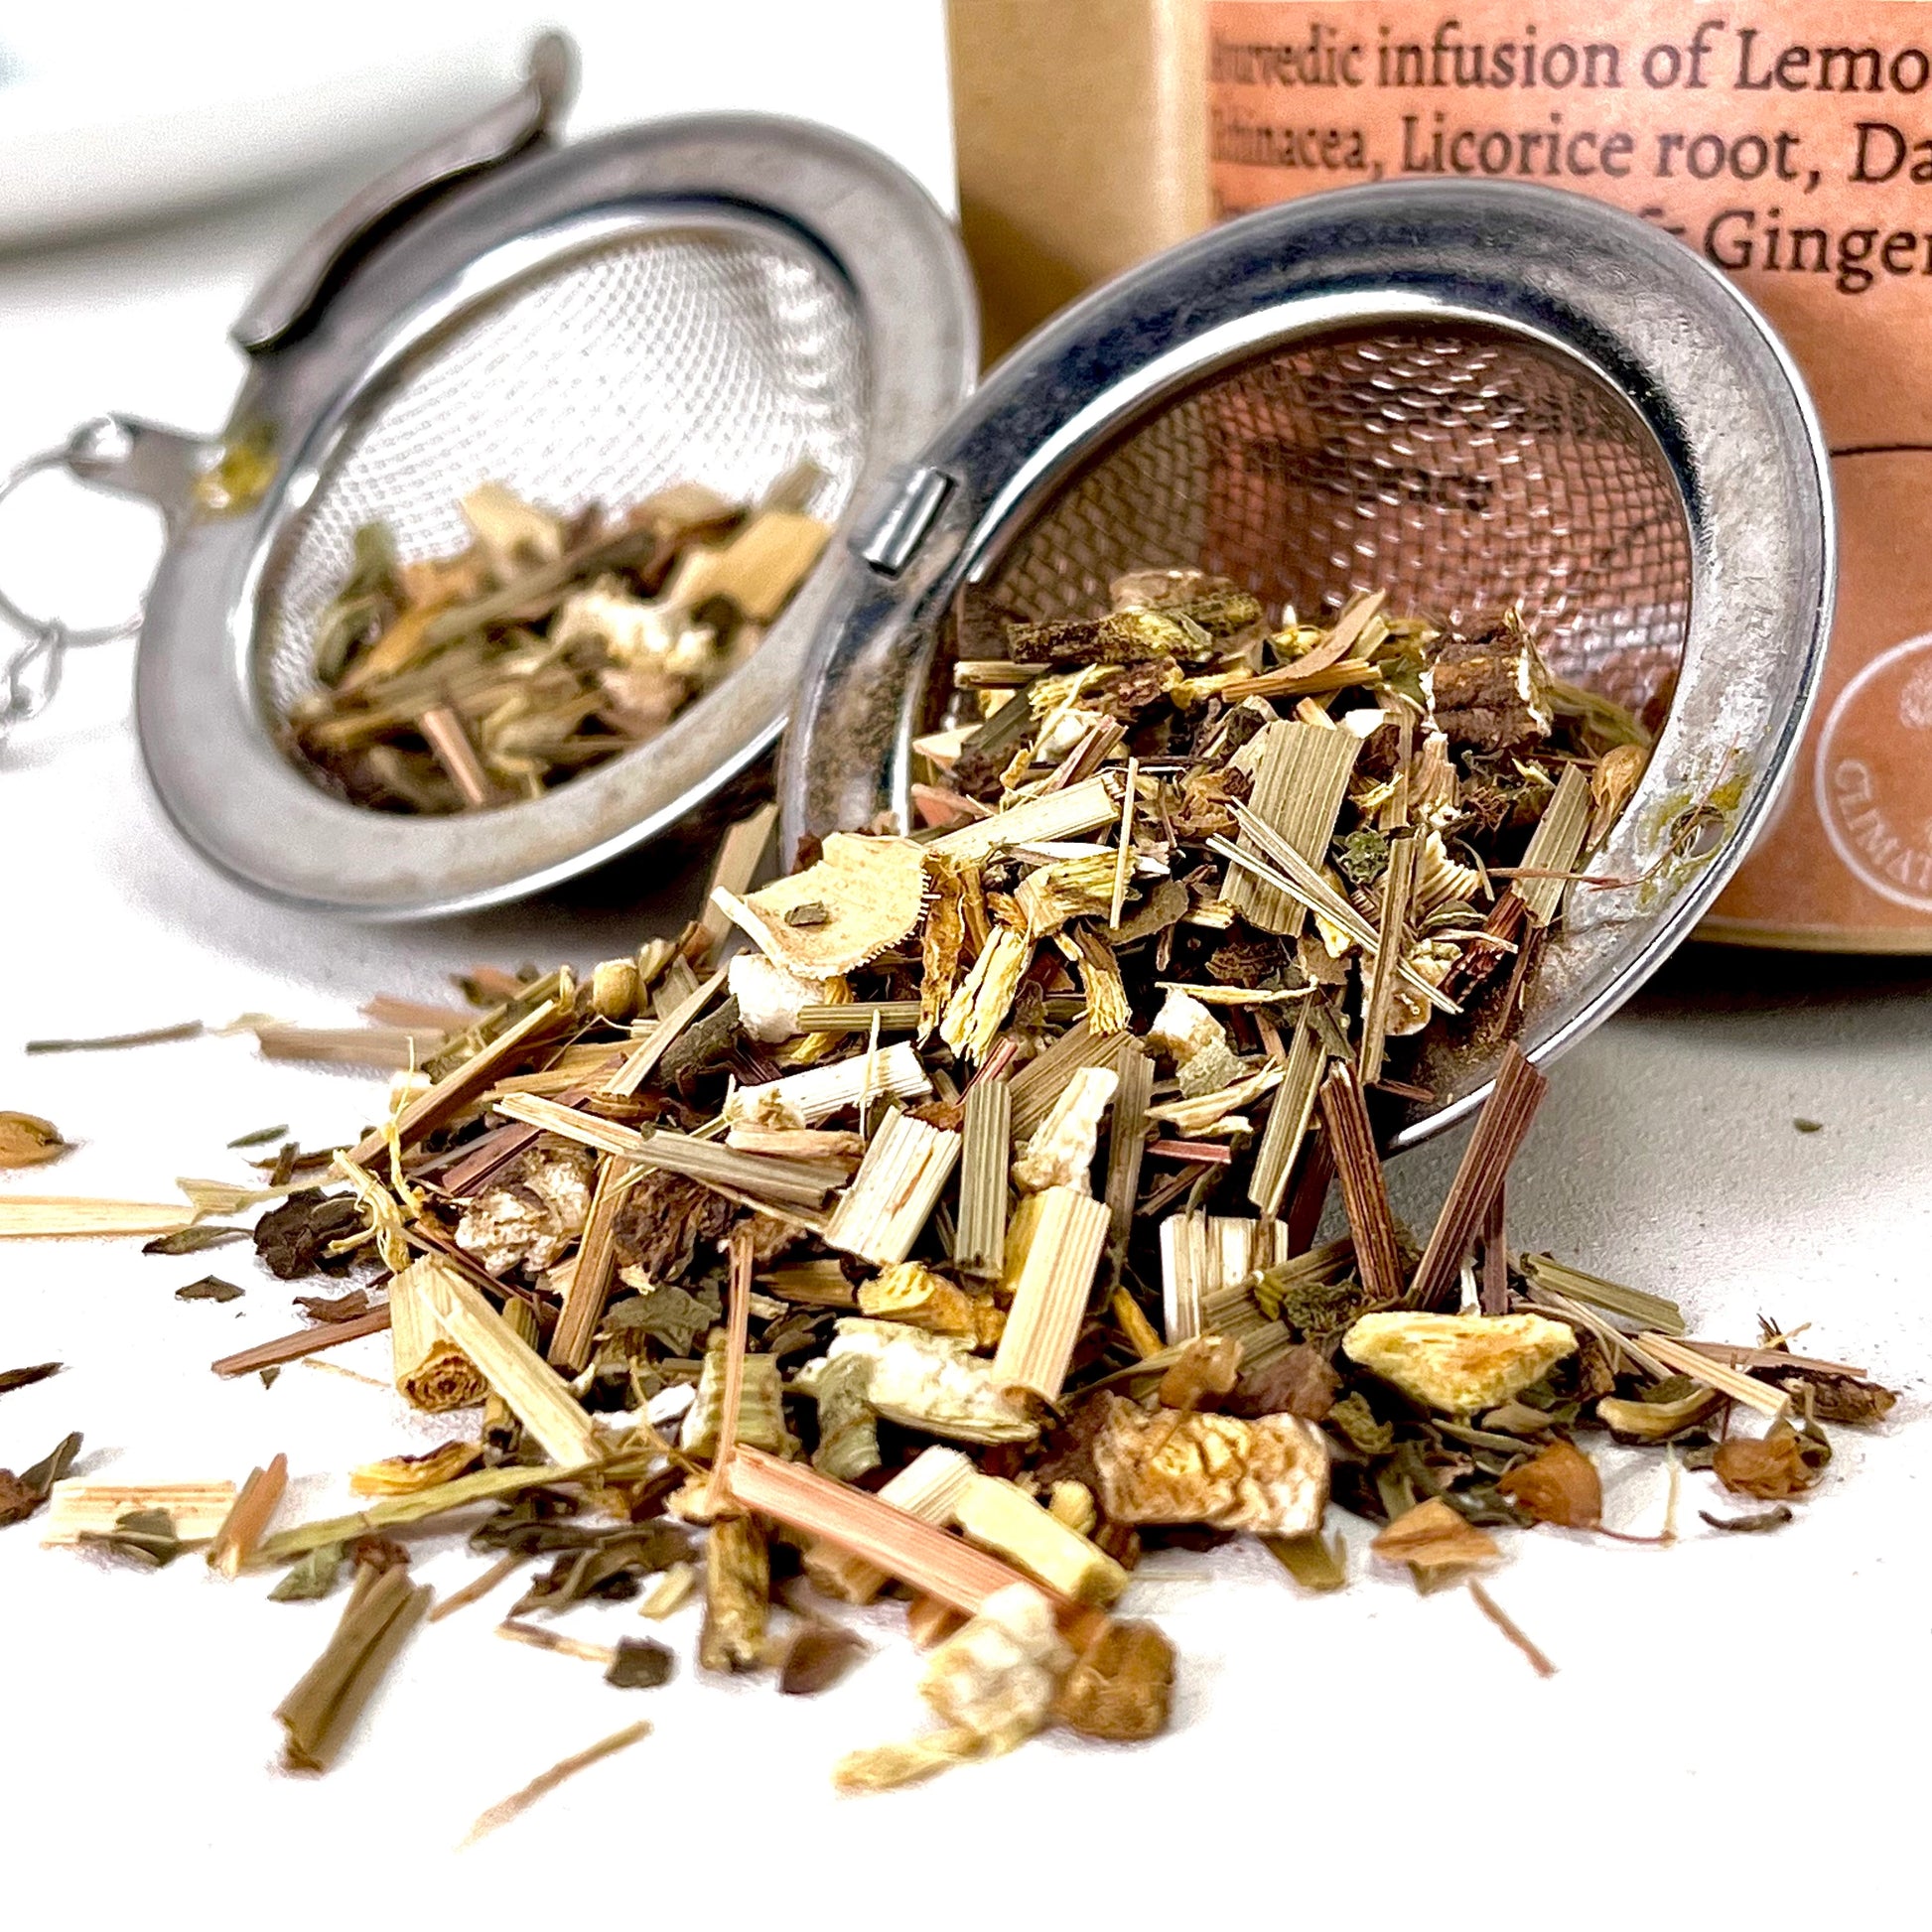 A loose leaf tea mix with Lemongrass, Echinacea, Licorice root, Dandelion,  Peppermint, Tulsi, & Ginger in a tea ball